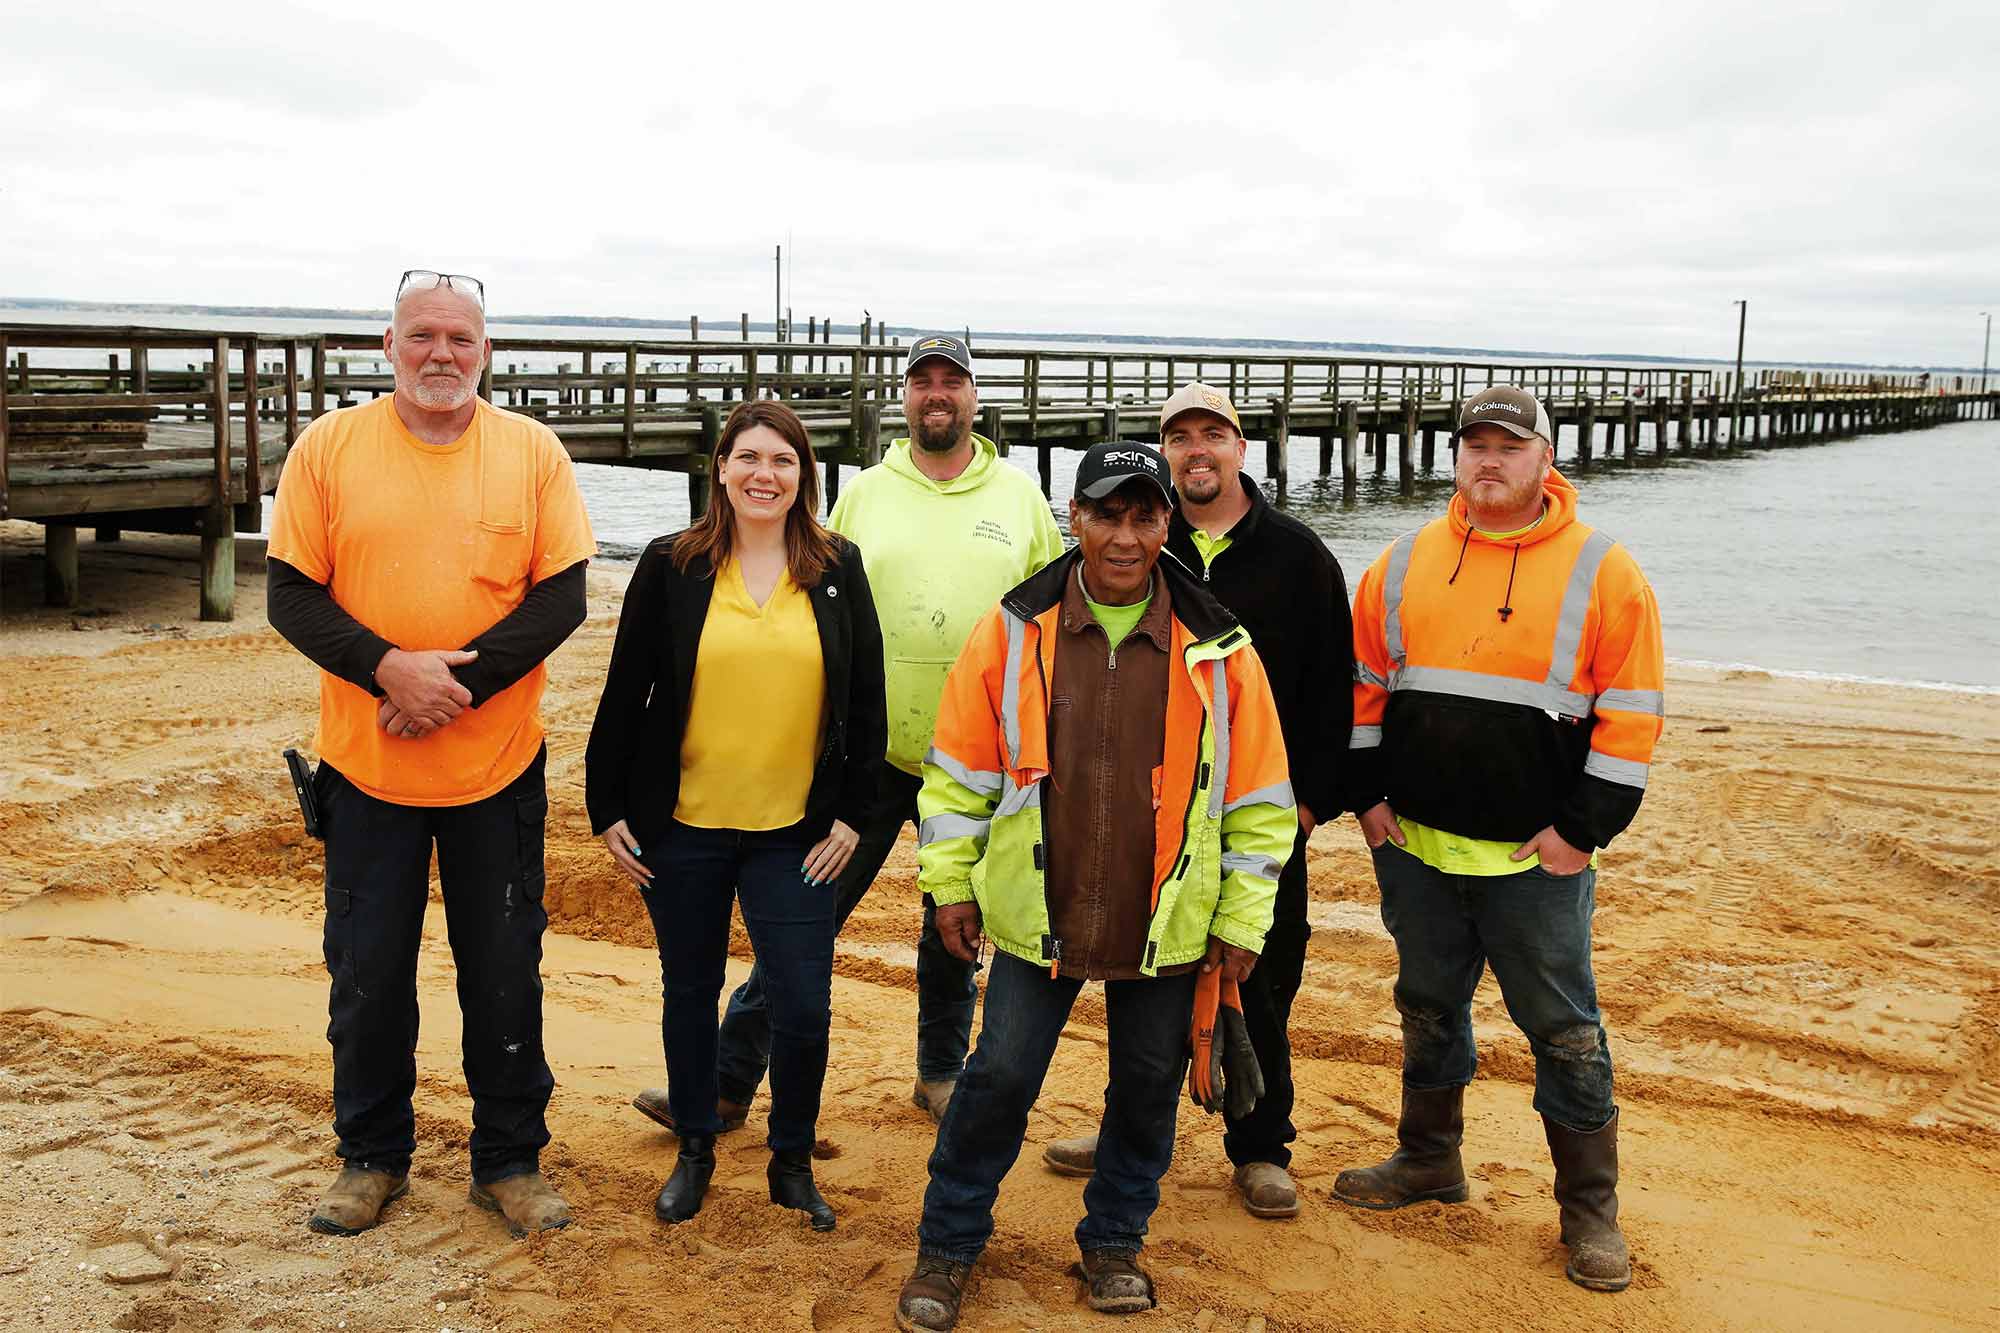 A group of people in safety colors poses for a portrait in the sand in front of a long pier